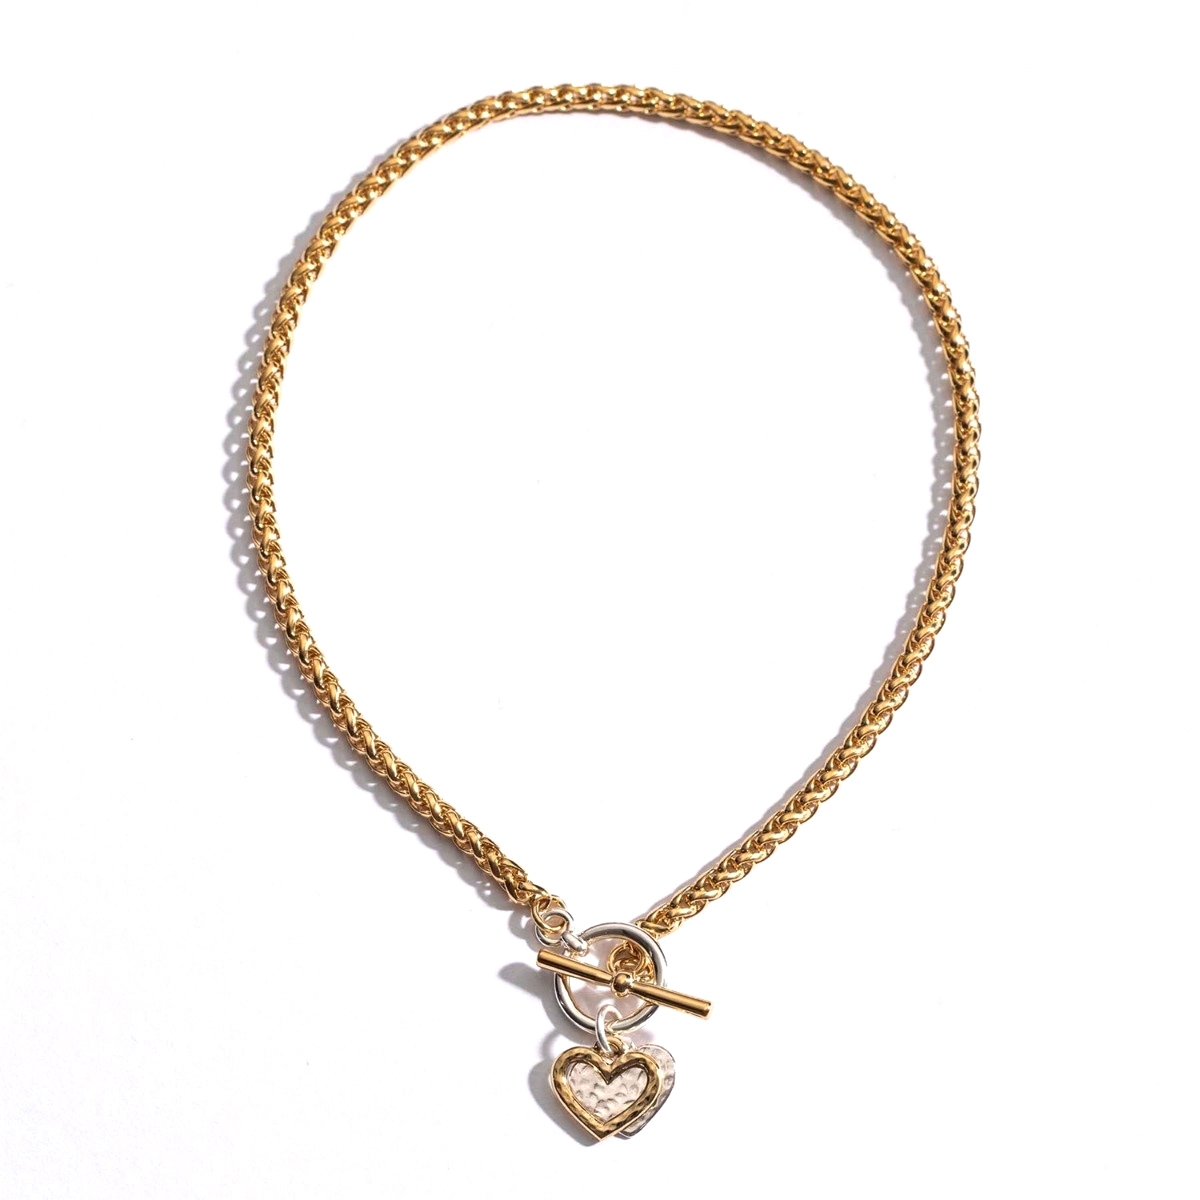 Danon Sterling Silver and 24K Gold-Plated Double Heart Necklace - 1